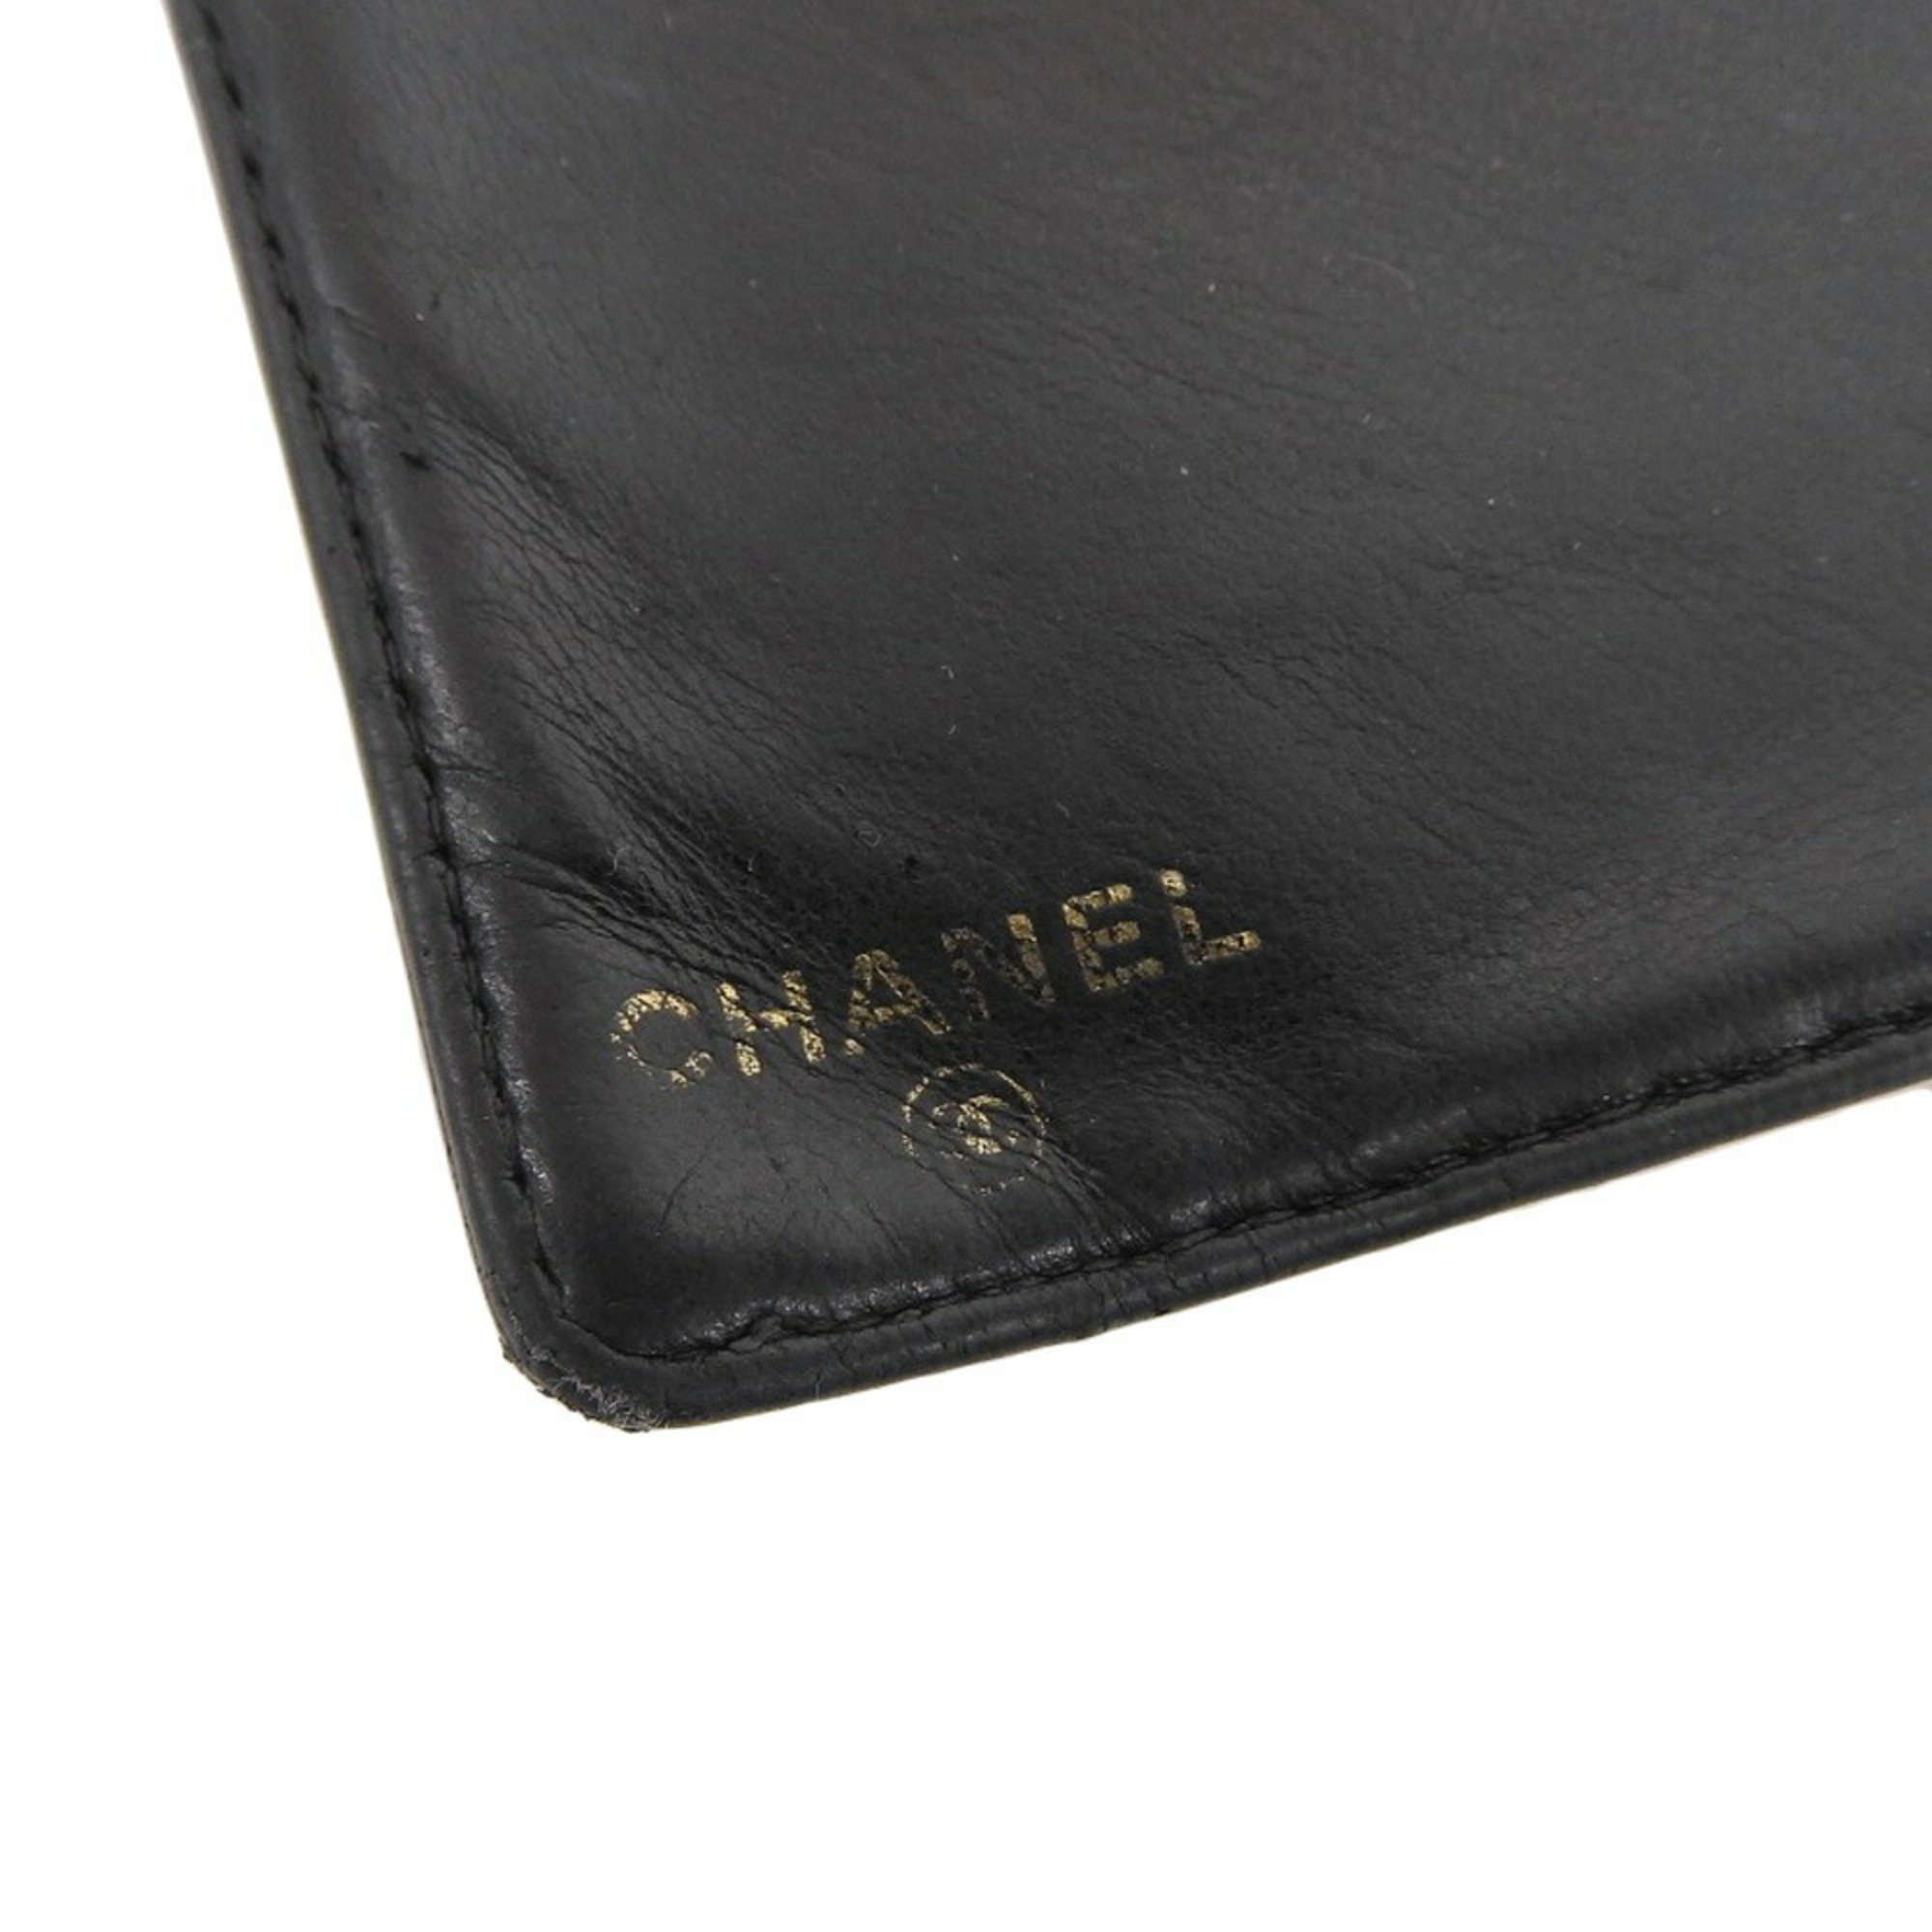 Chanel CHANEL long wallet with coco mark leather black seal 7 series A13498